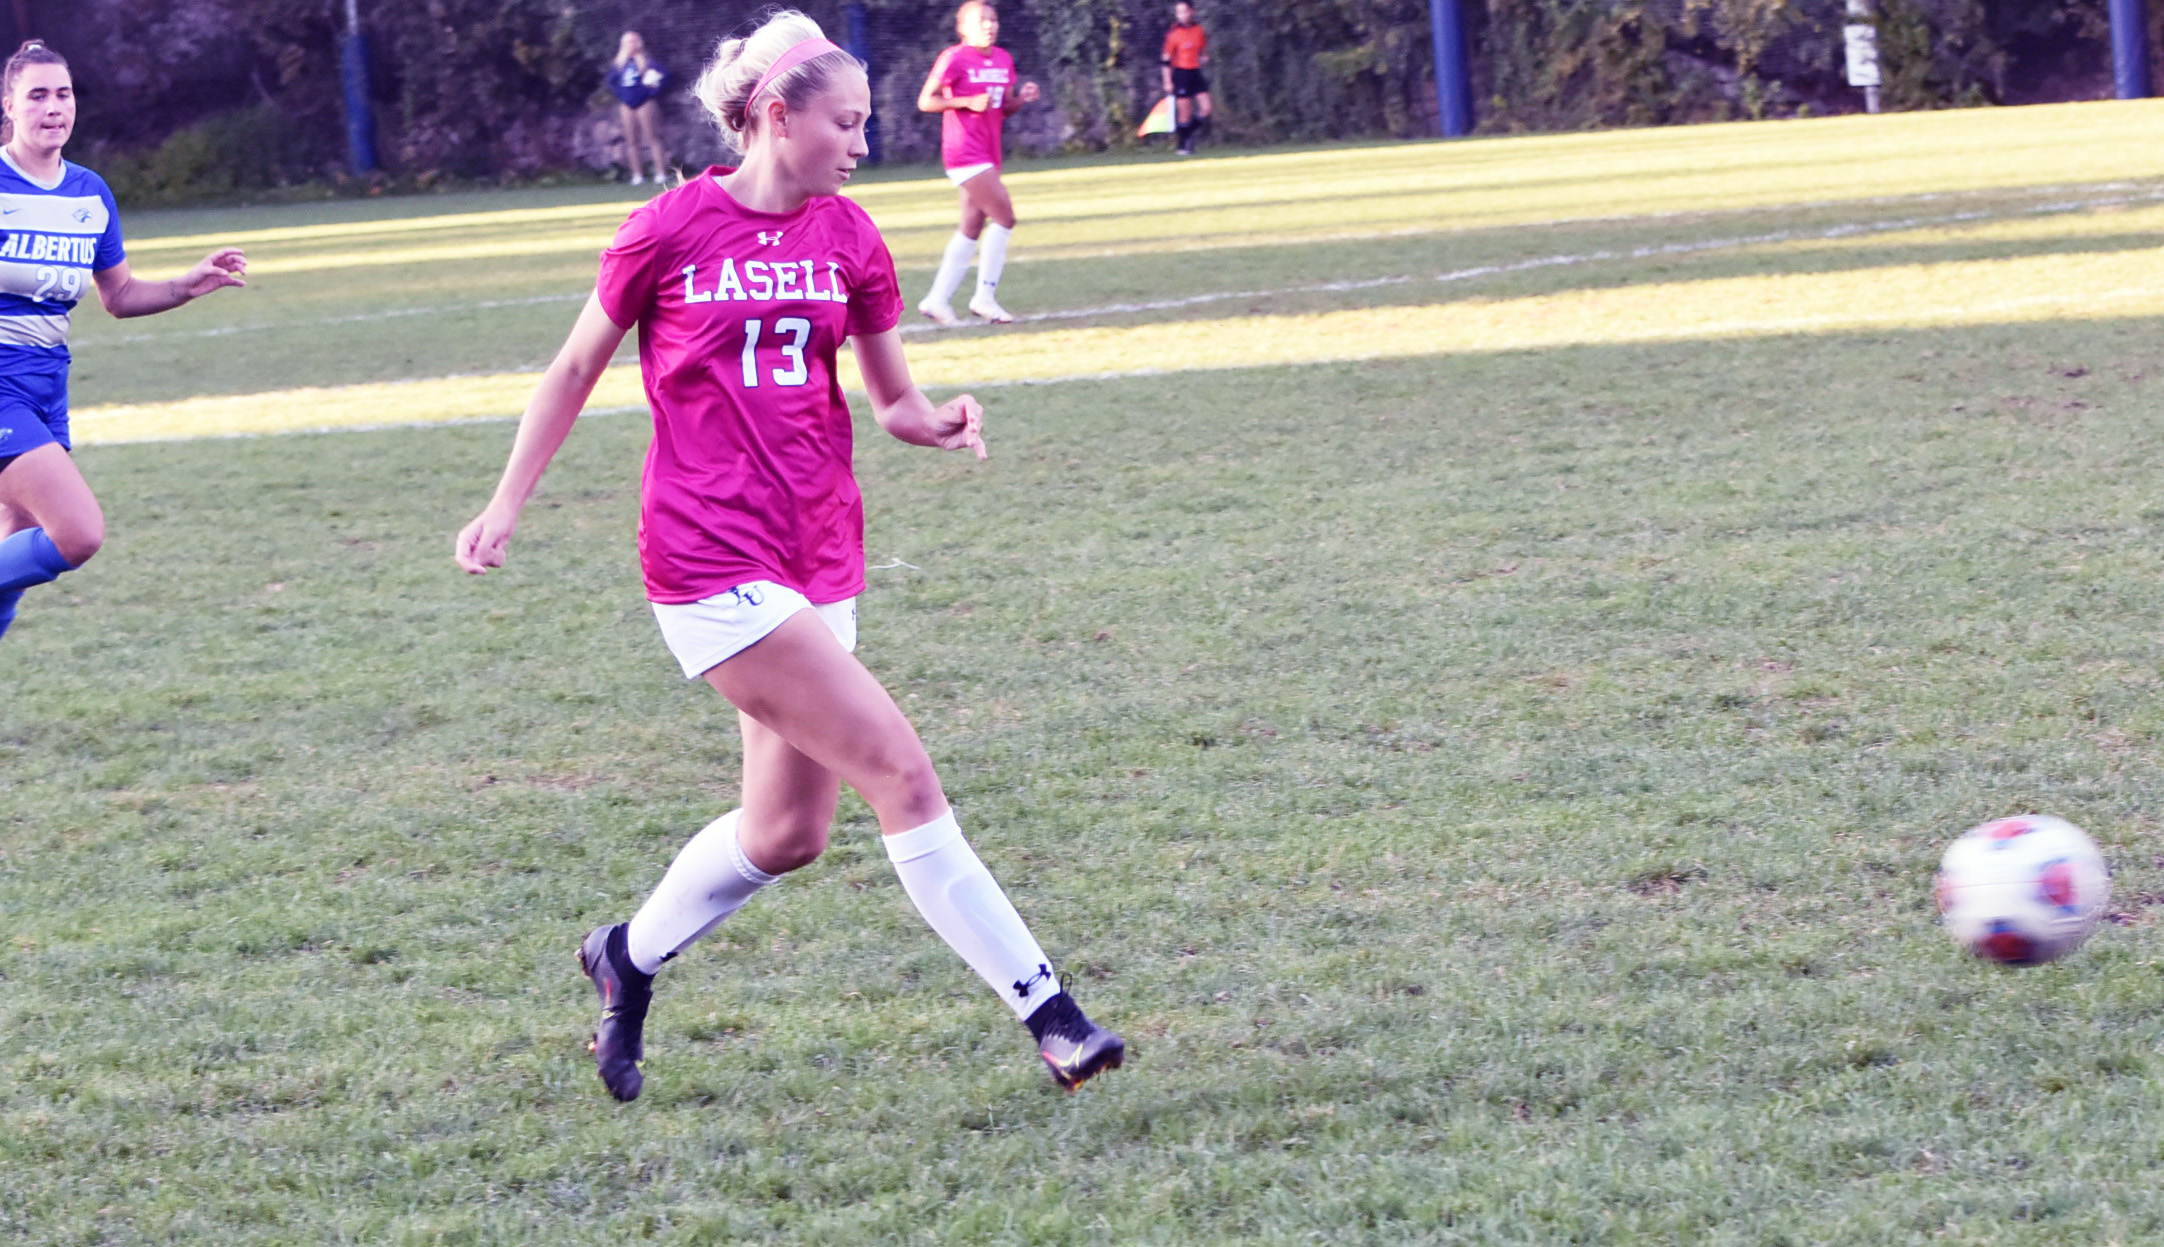 WSOC: Lasell secures two seed for the GNAC playoffs with Regis victory